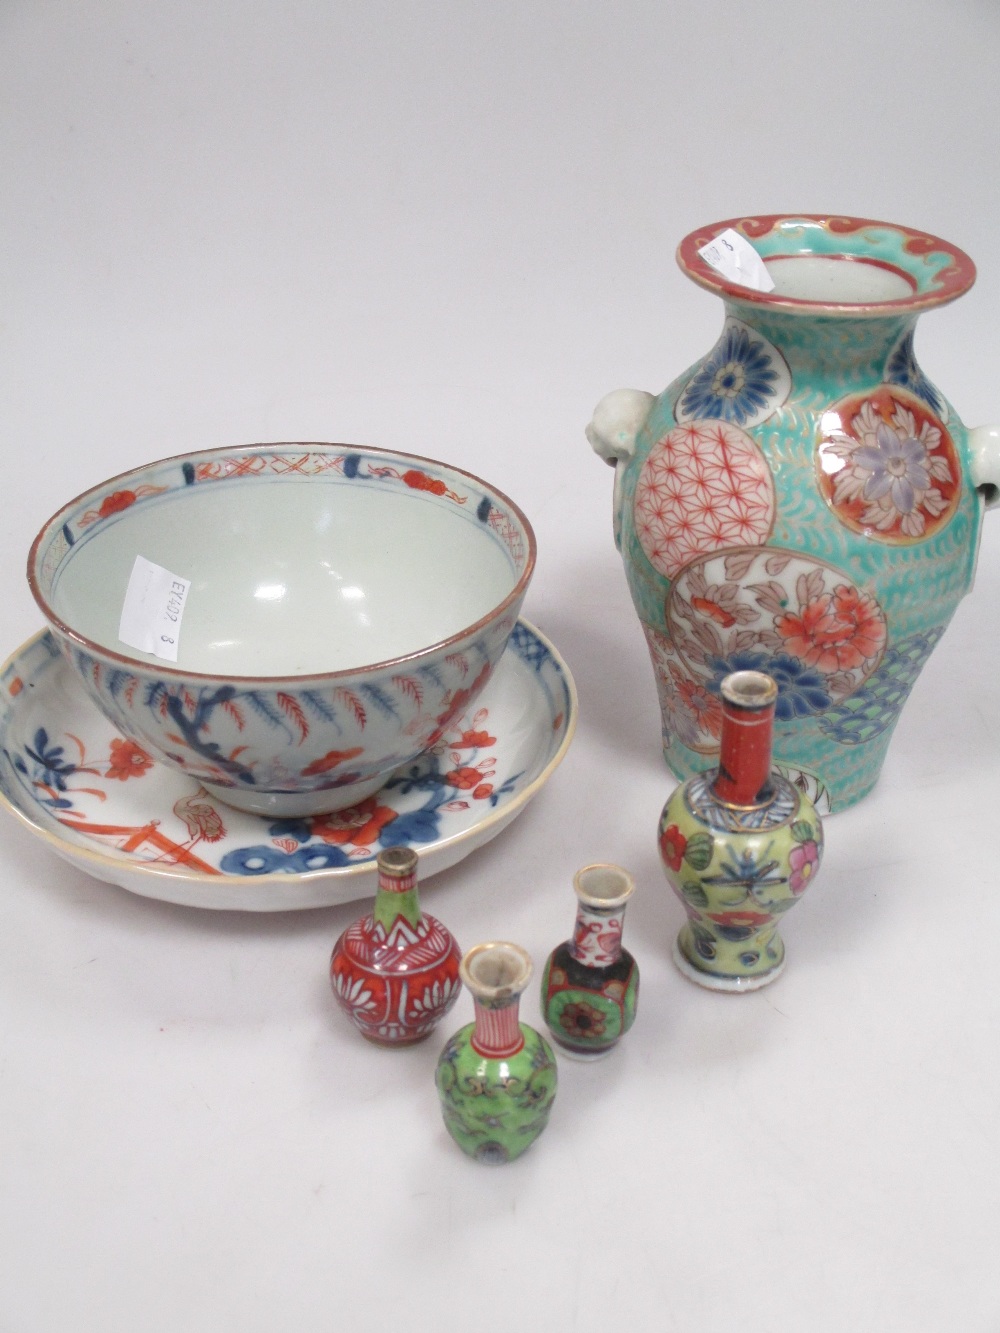 Four miniature Chinese vases, an Imari bowl and saucer and another Chinese vase